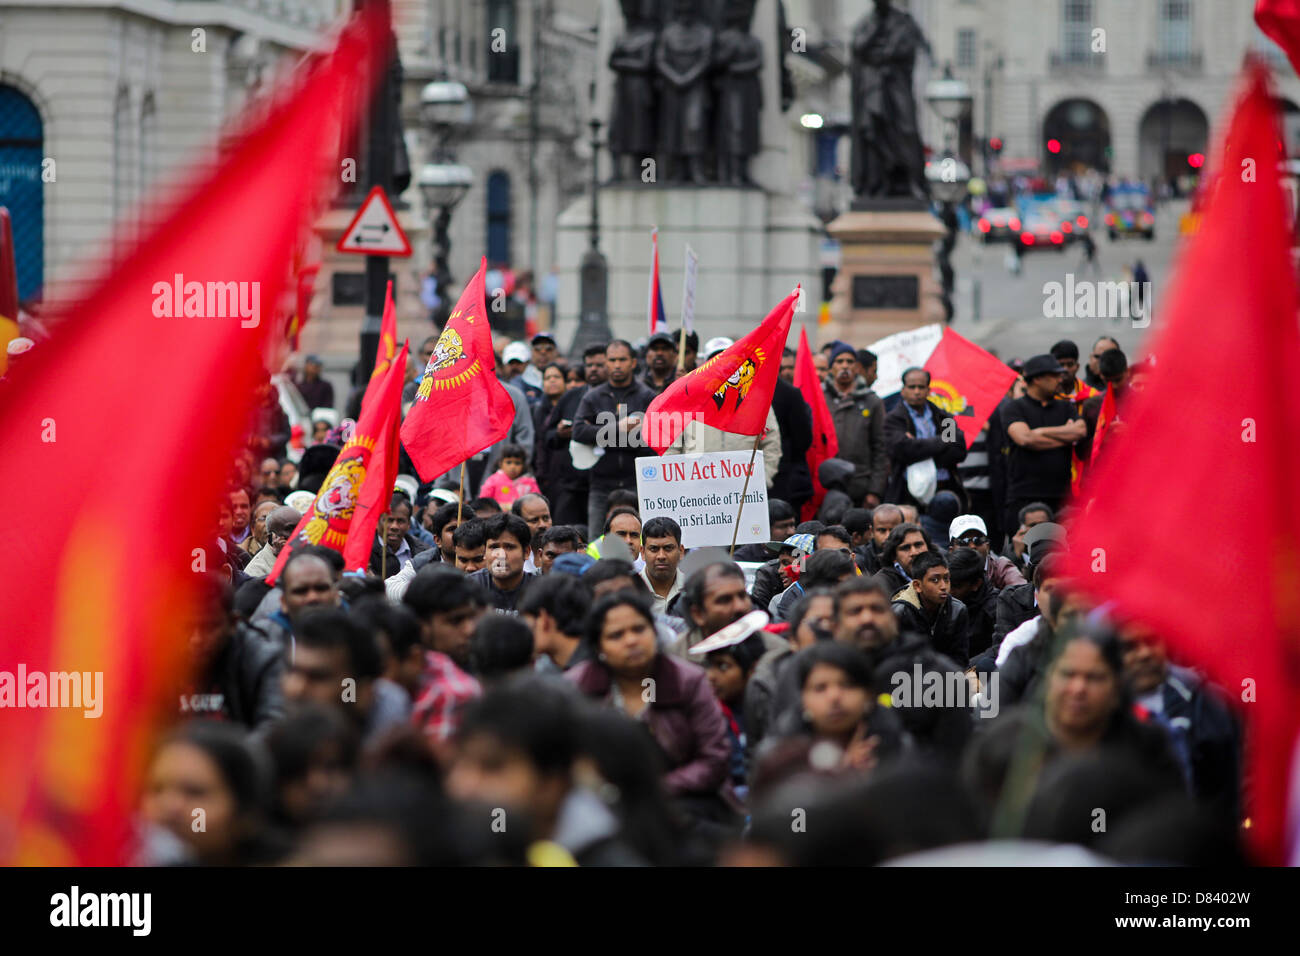 London, UK. 18th May 2013. Thousands of Tamils march through central London to commemorate those killed during the final stages of the Sri Lankan civil war and to call on Prime Minister David Cameron to boycott the Commonwealth Heads of Government Meeting, to be held on Colombo in November 2013. Credit:  Rob Pinney / Alamy Live News Stock Photo